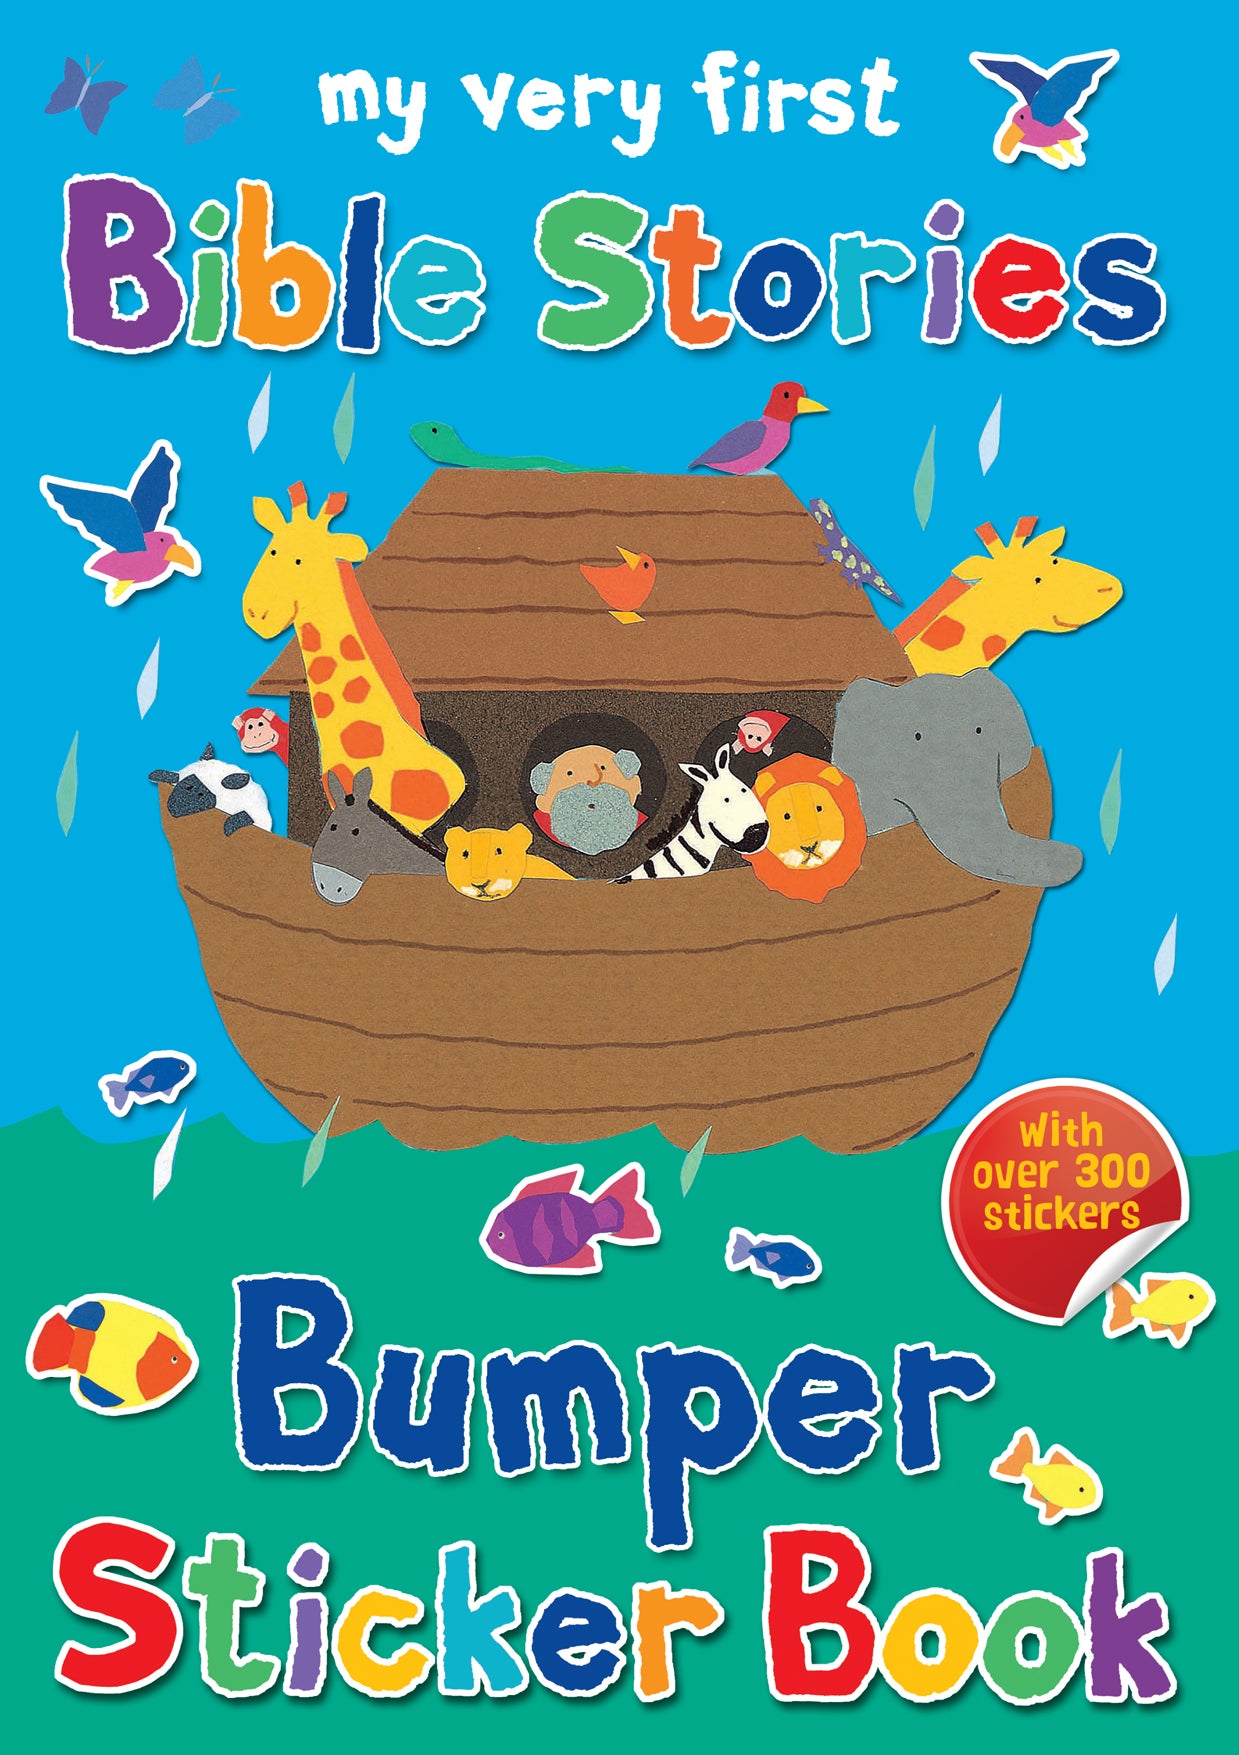 Image of My Very First Bible Stories Bumper Sticker Book other